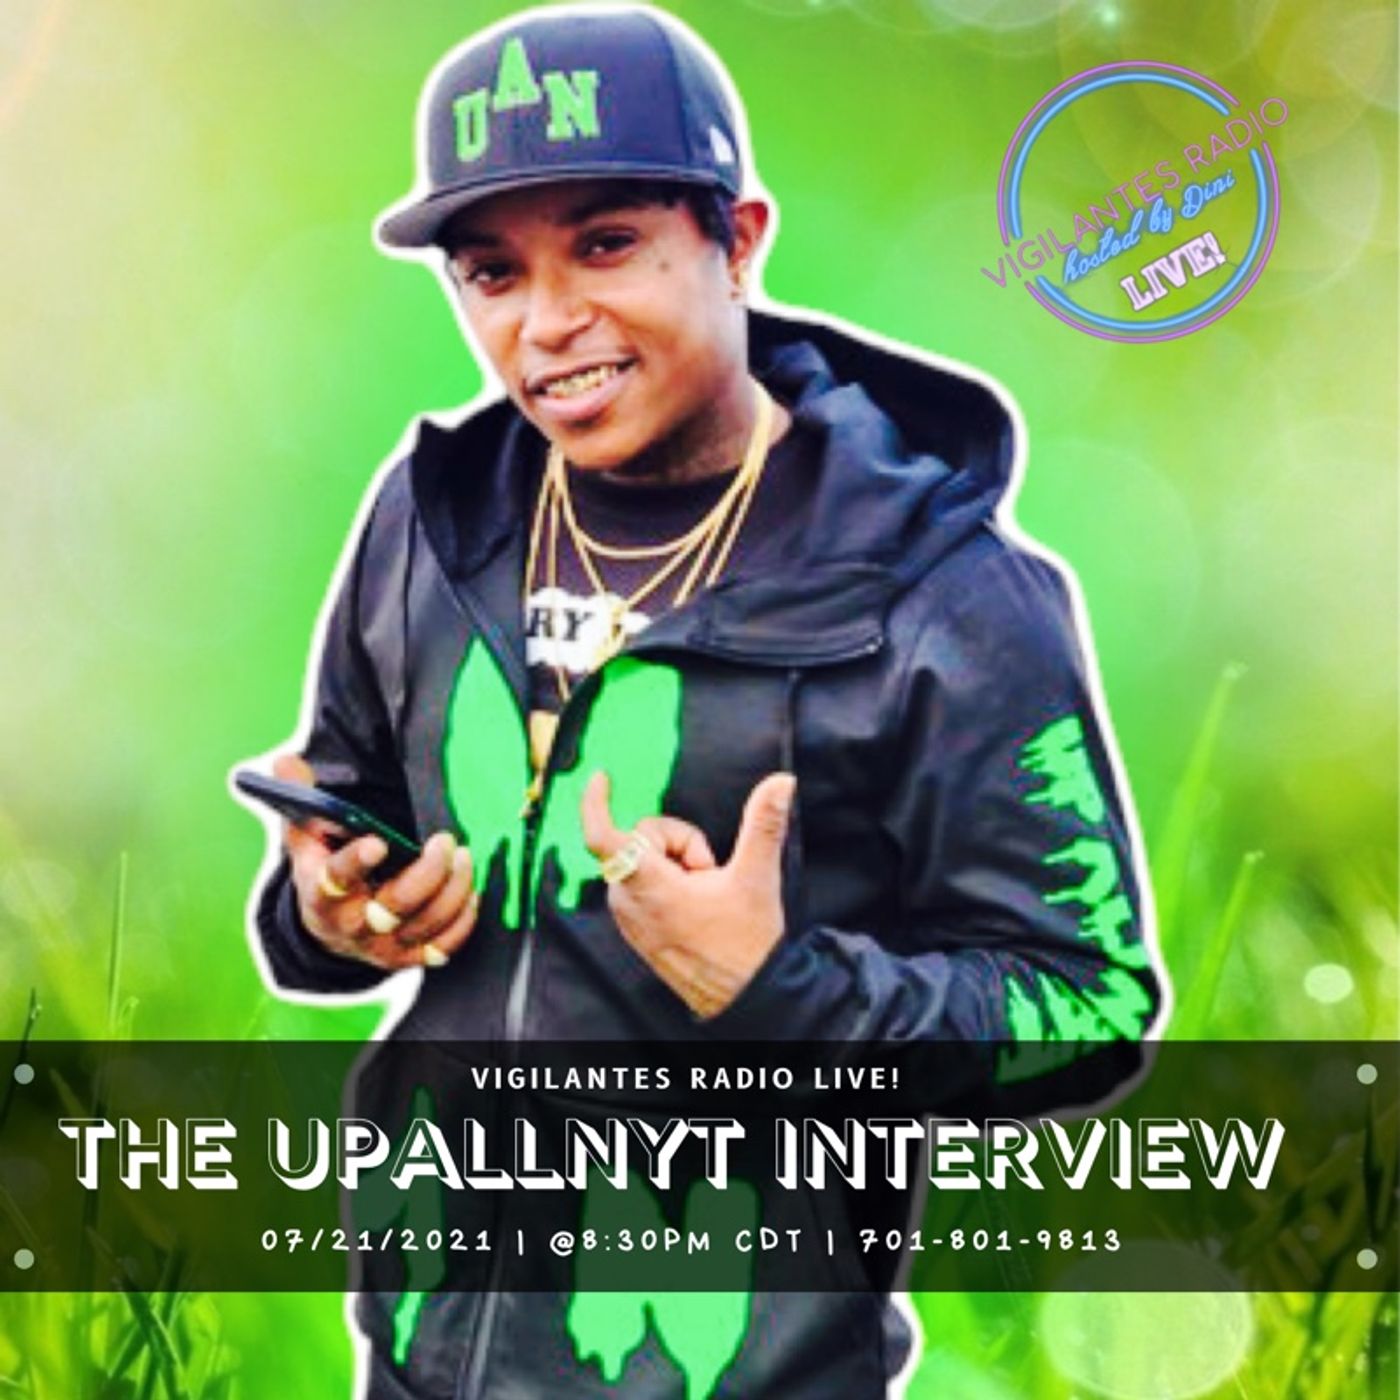 The UpAllNyt Interview. Image